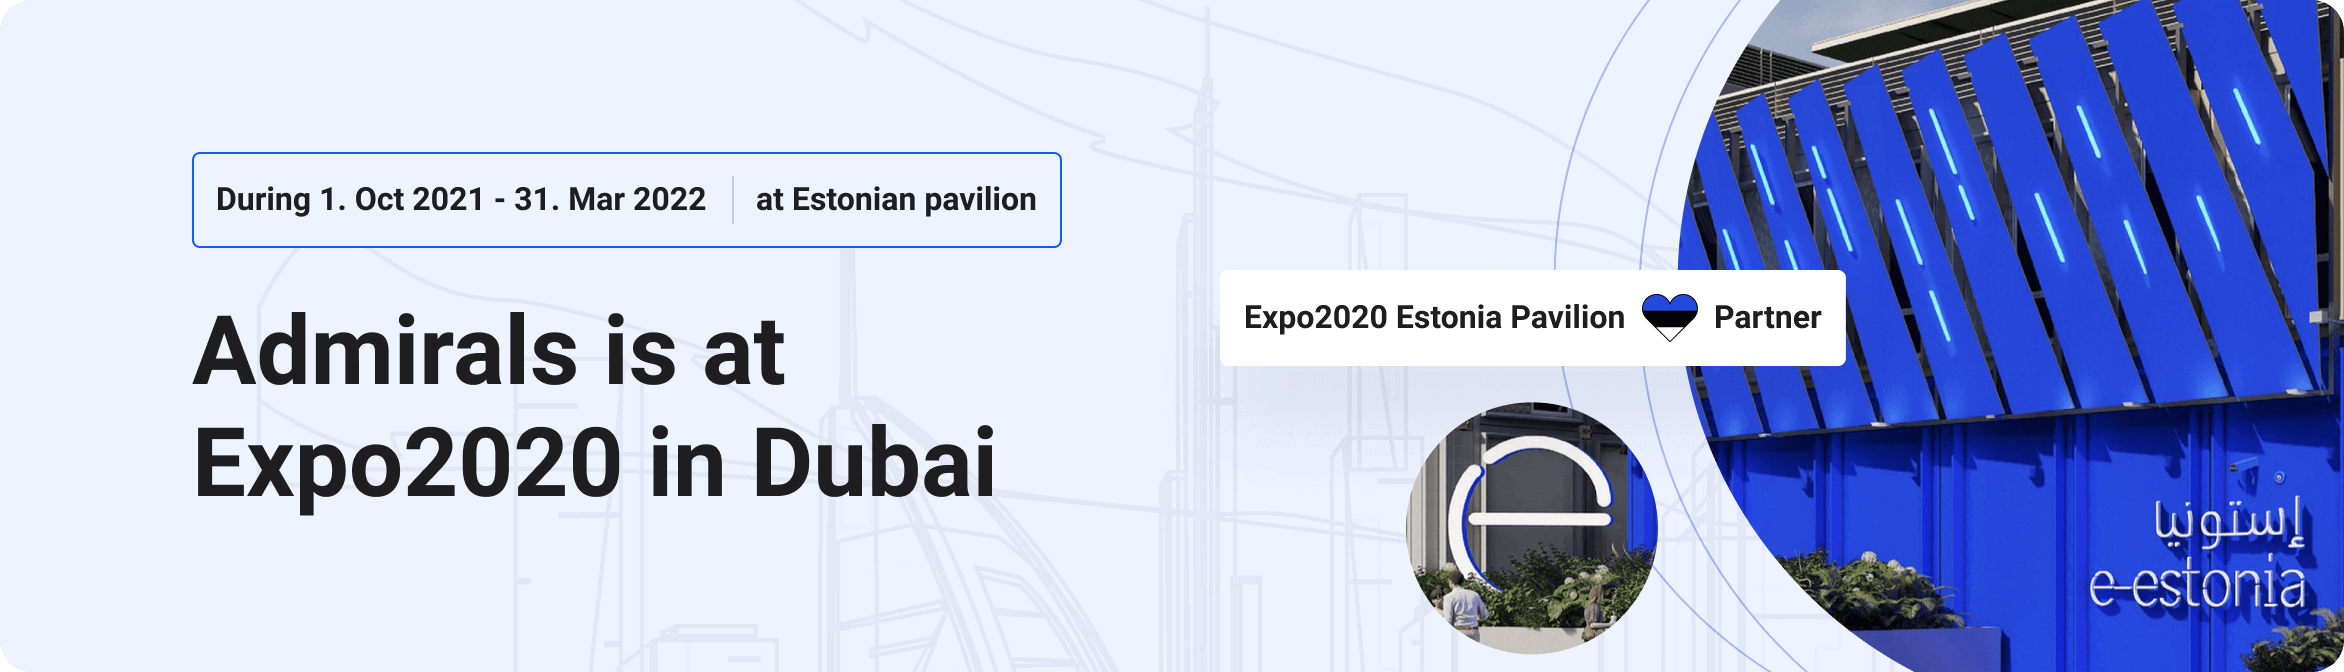 Admirals is at Expo2020 in Dubai